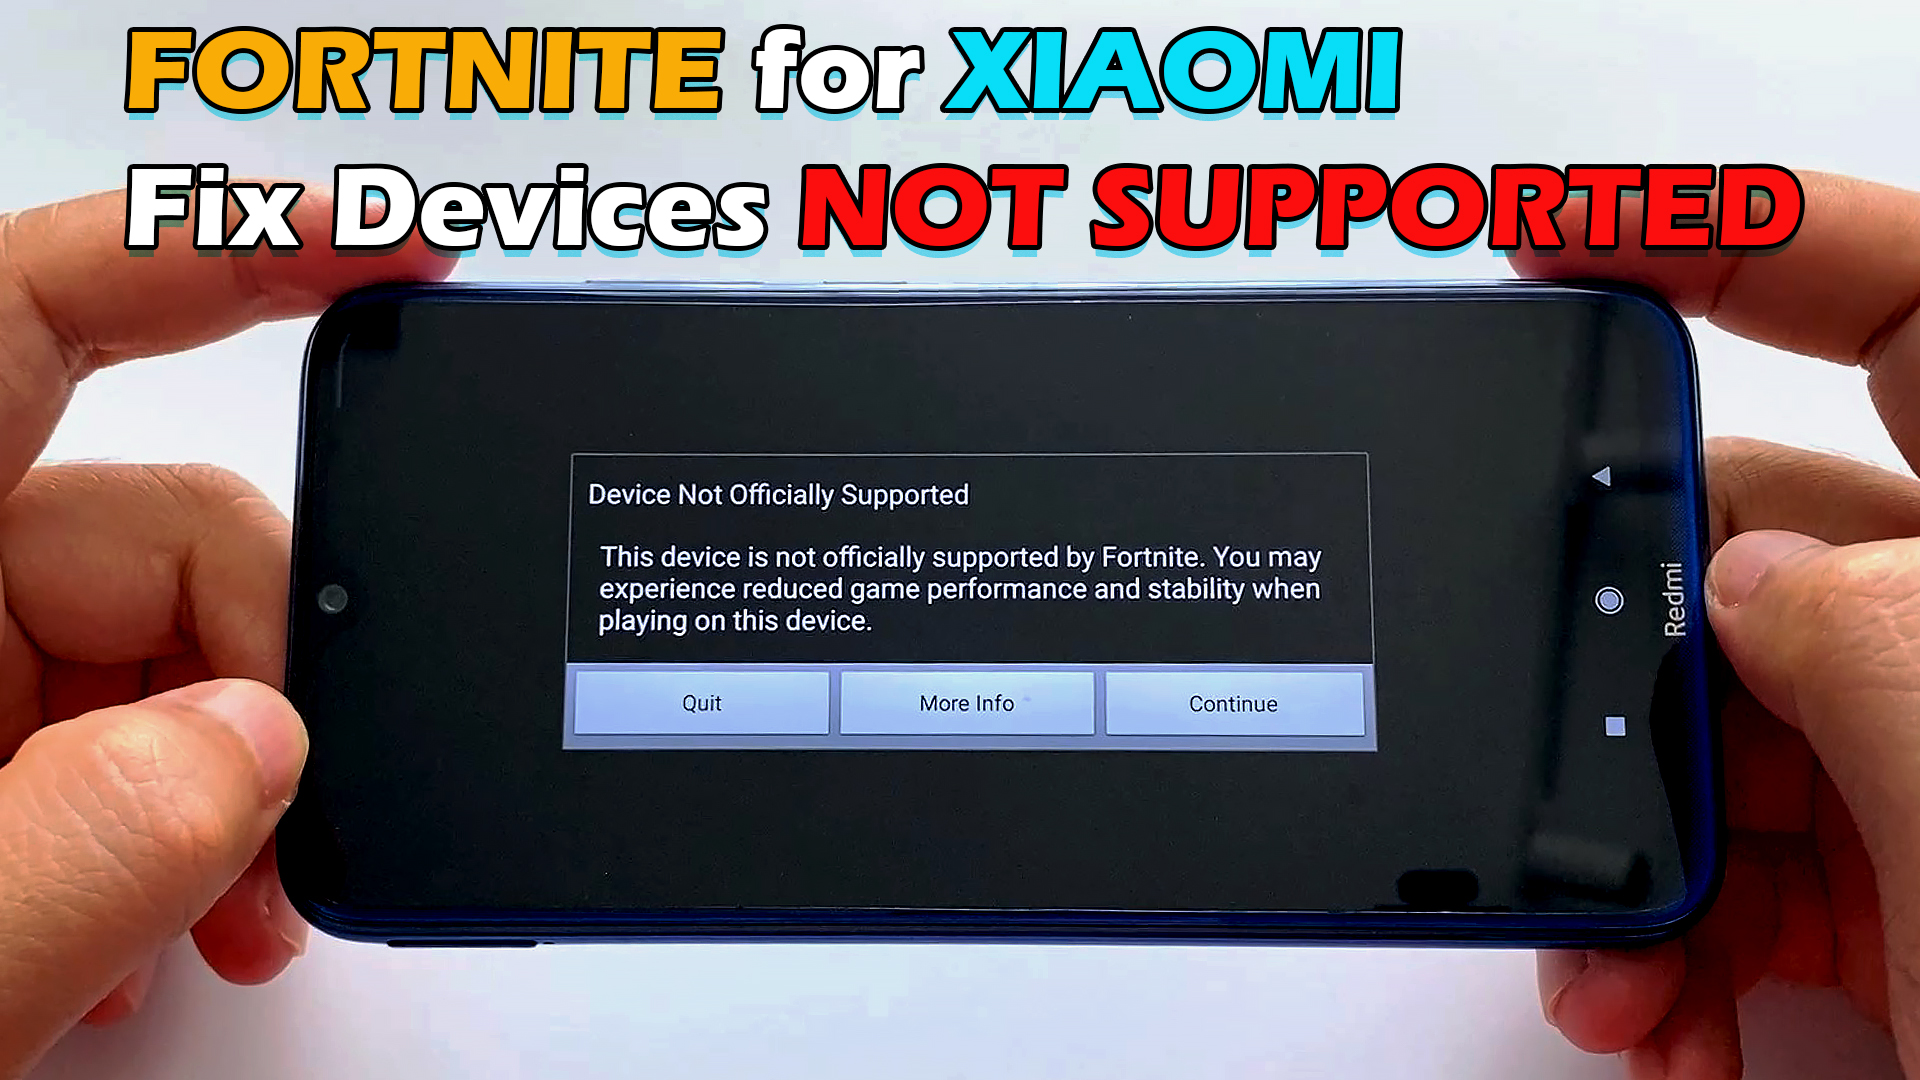 Your device not supported. Xiaomi Fix. АПК фикс. Device not support. Unable to Run on this device this device not support Vulkan.